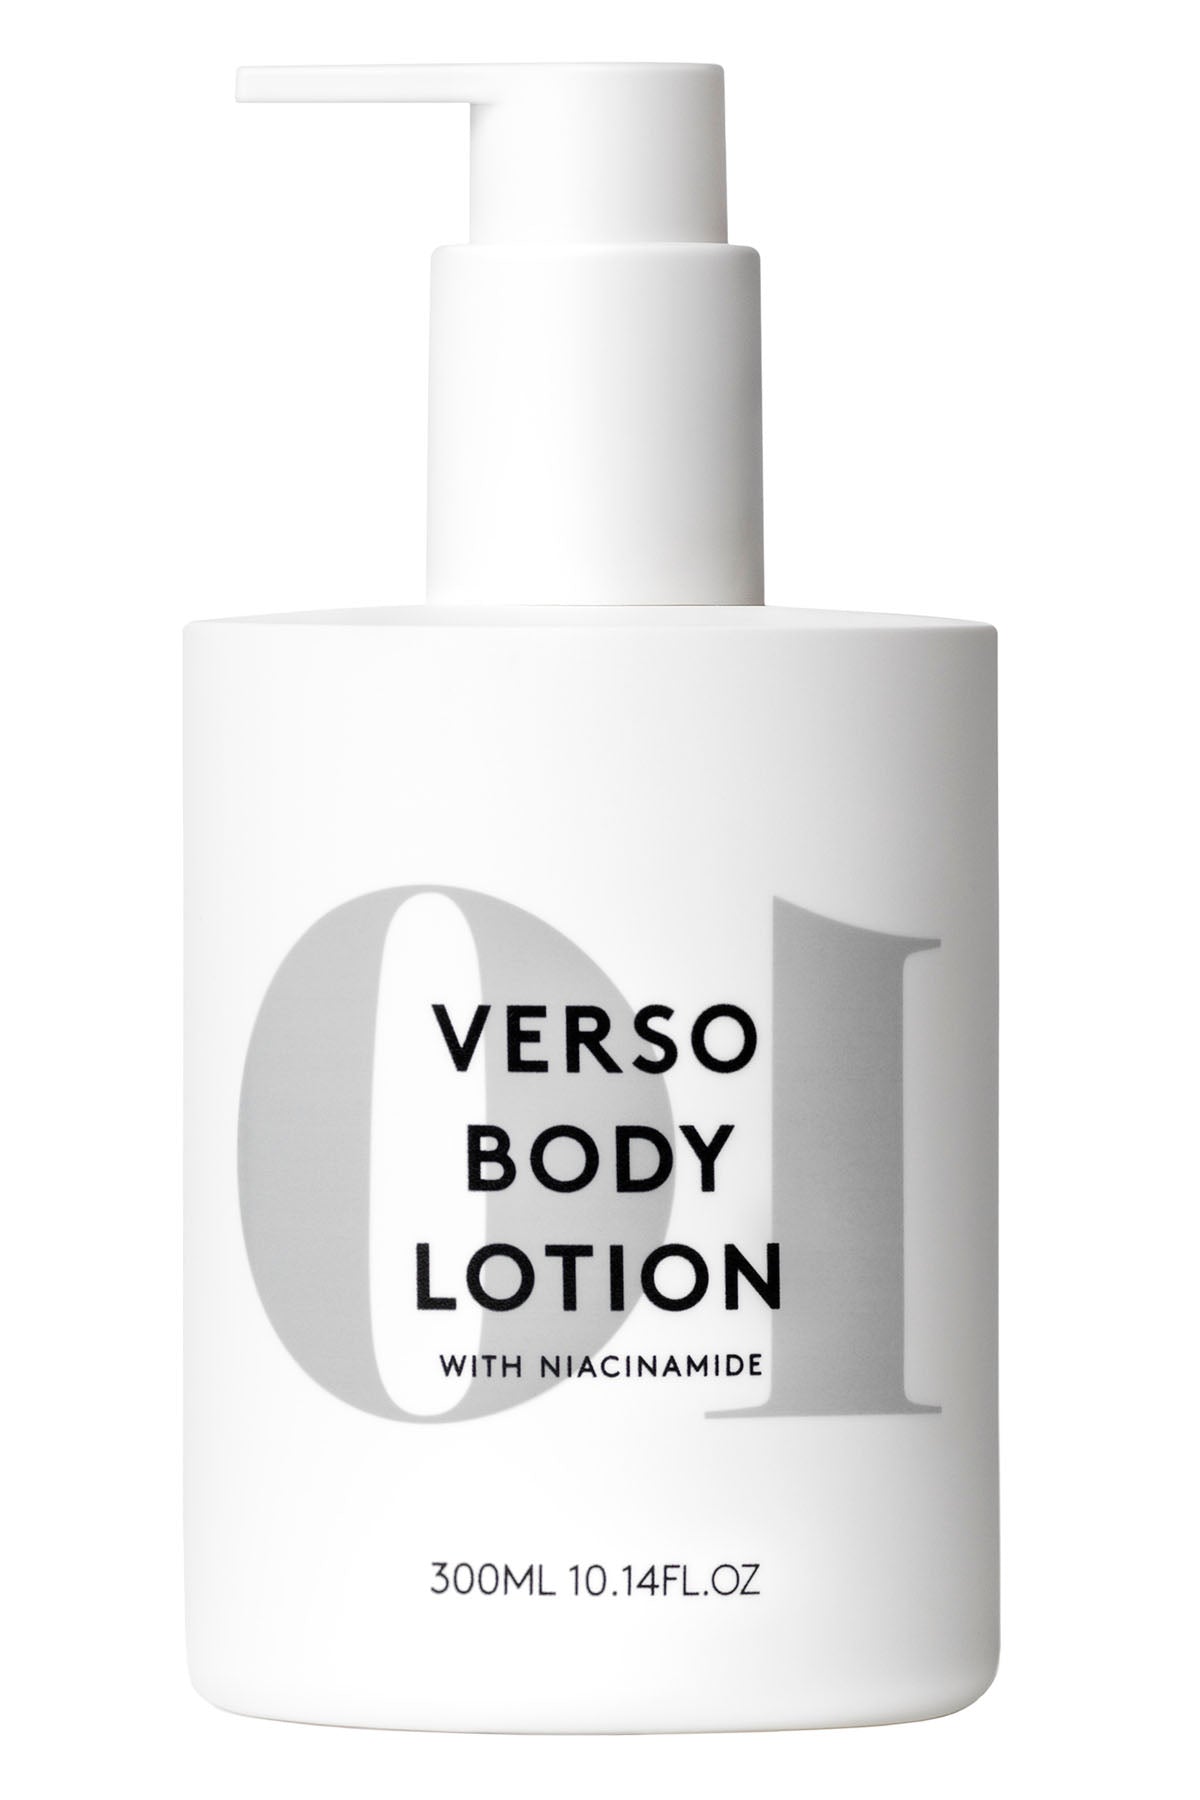 Verso Body Lotion with Niacinamide 300ML